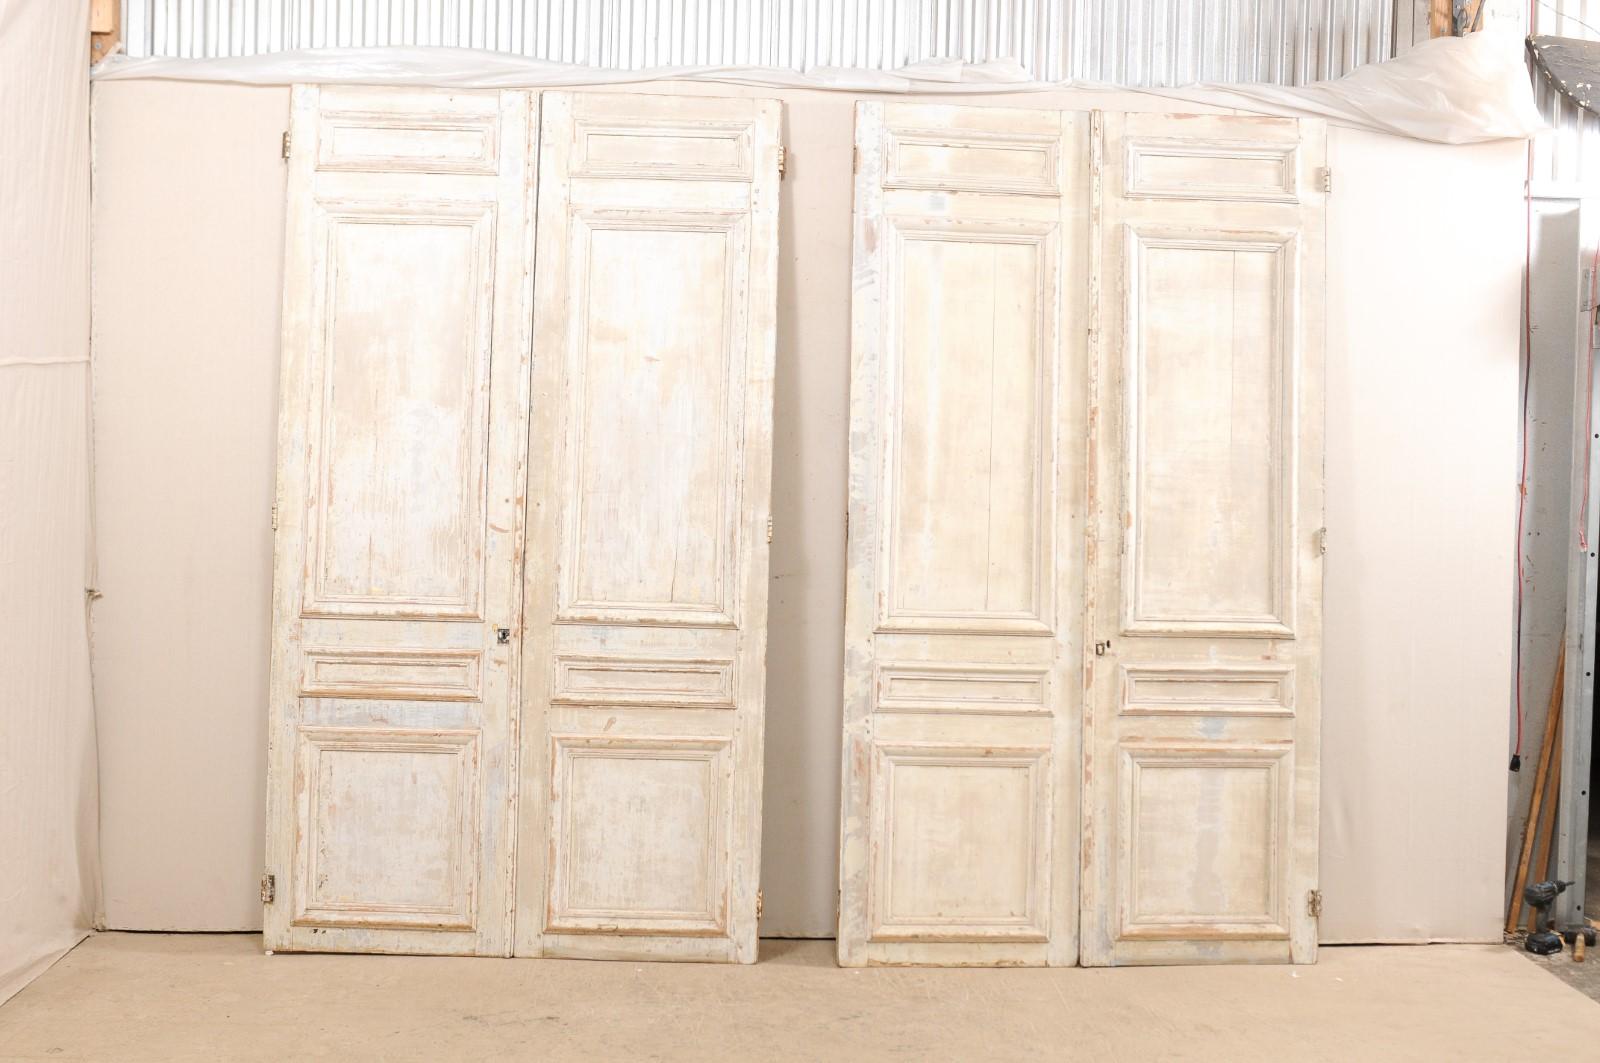 A set of two pairs of French panel doors from the mid-19th century. This set of 2 pair of French doors each feature four nicely molded panels at front, with more plain, recessed panels on their backsides, standing approximately 8.75 feet in height.